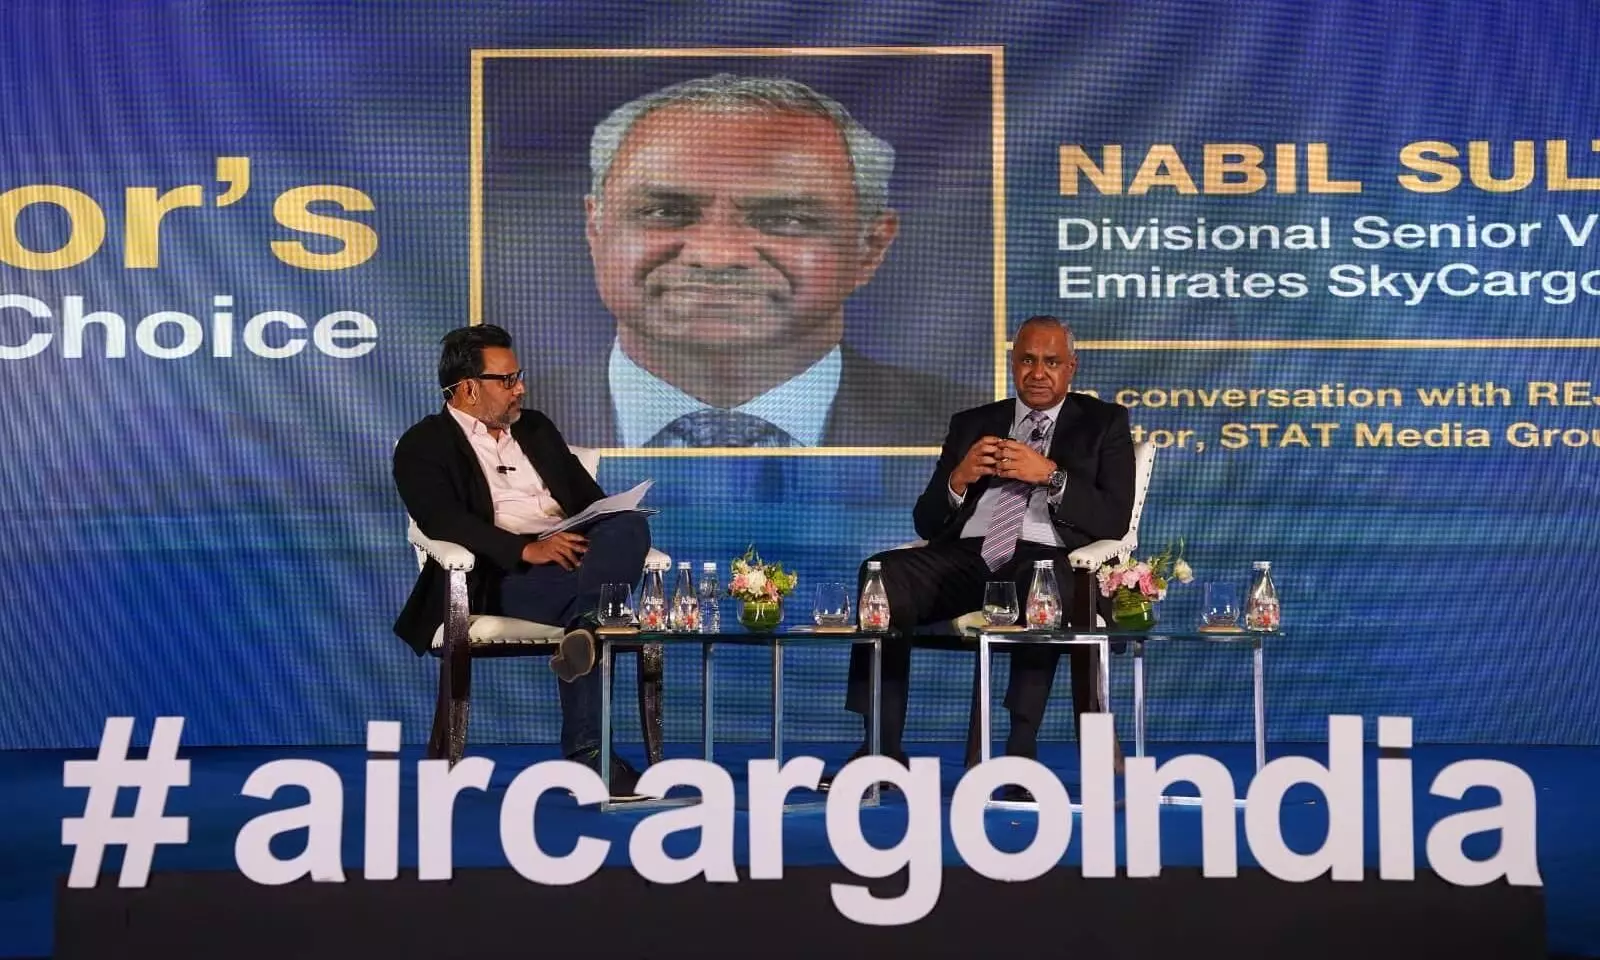 Nabil Sultan promoted; no replacement announced for Emirates SkyCargo head